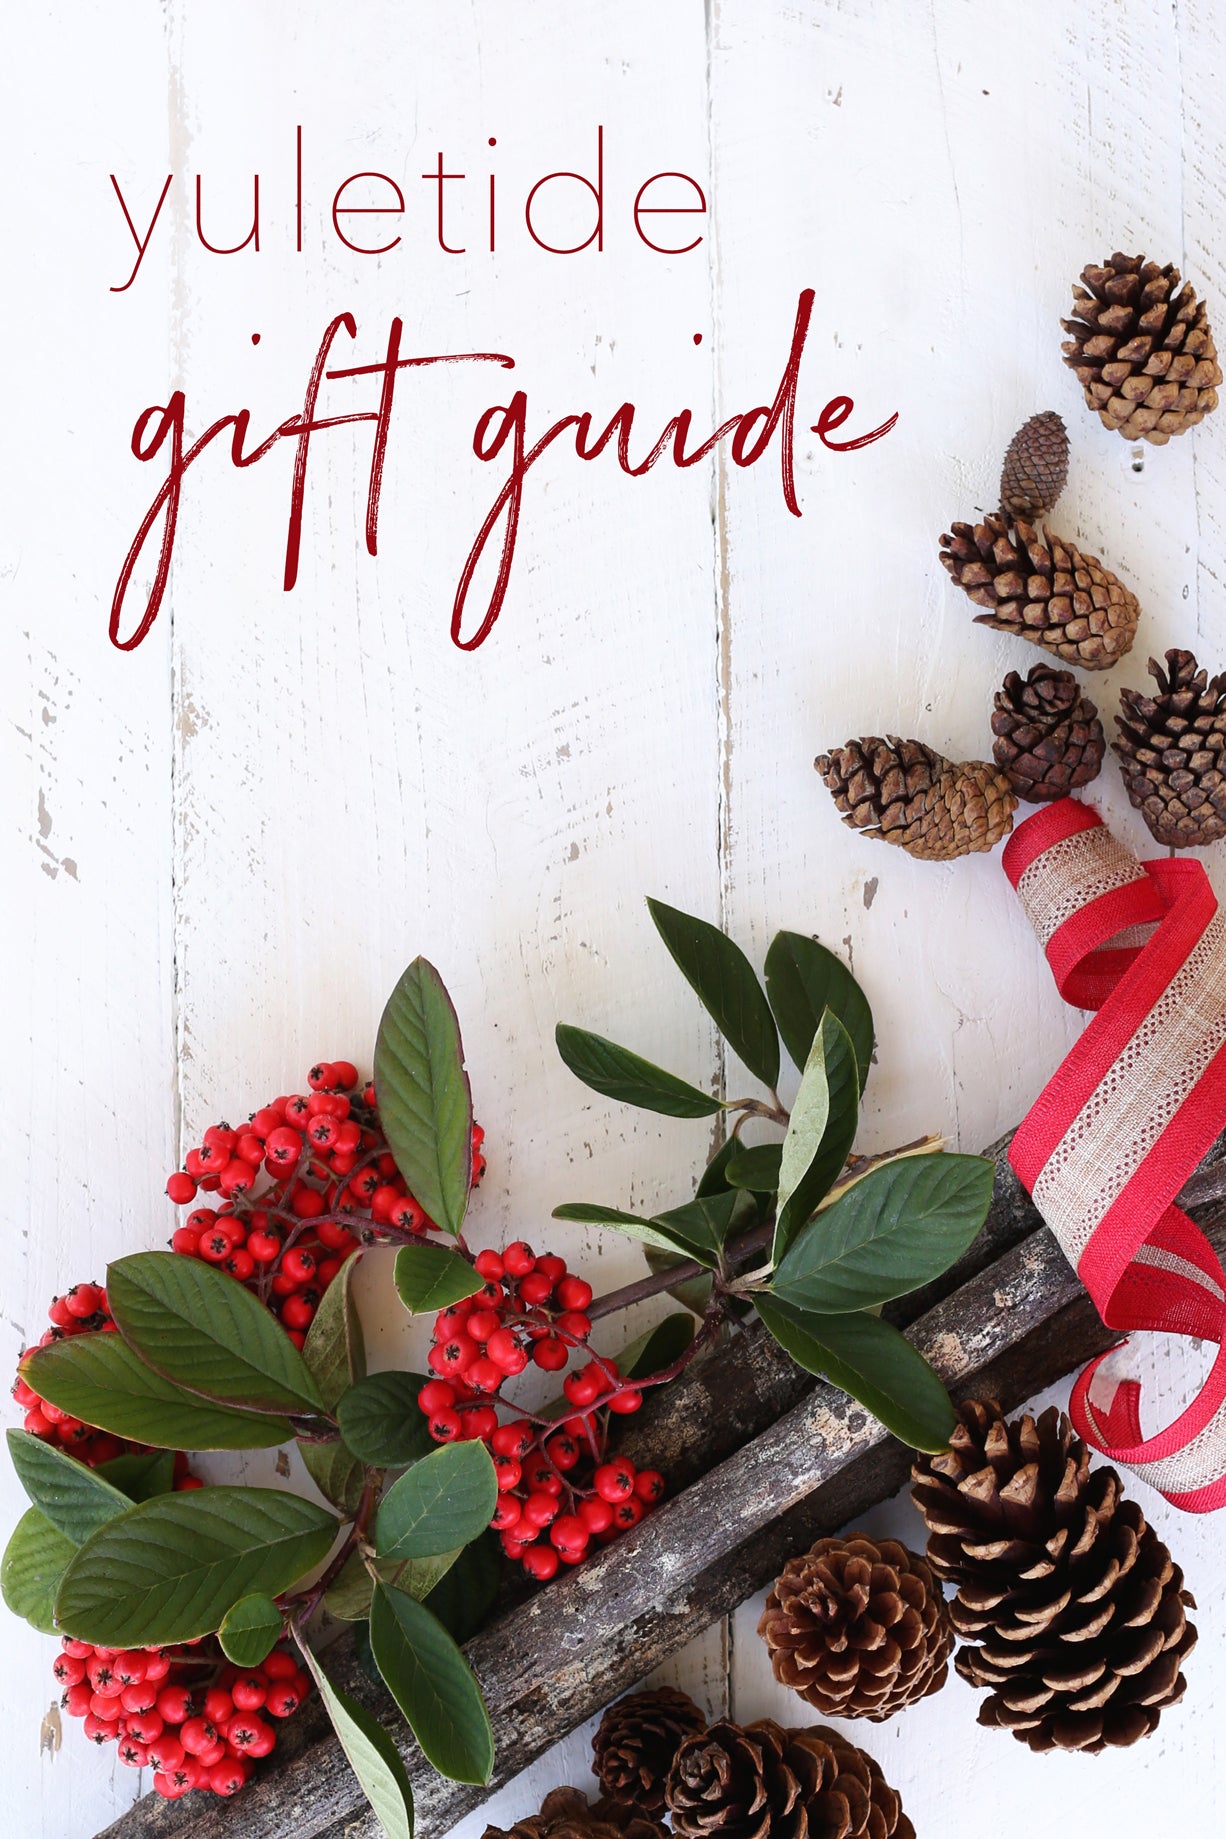 The Yuletide Gift Guide - Gifts for every lady on your list!